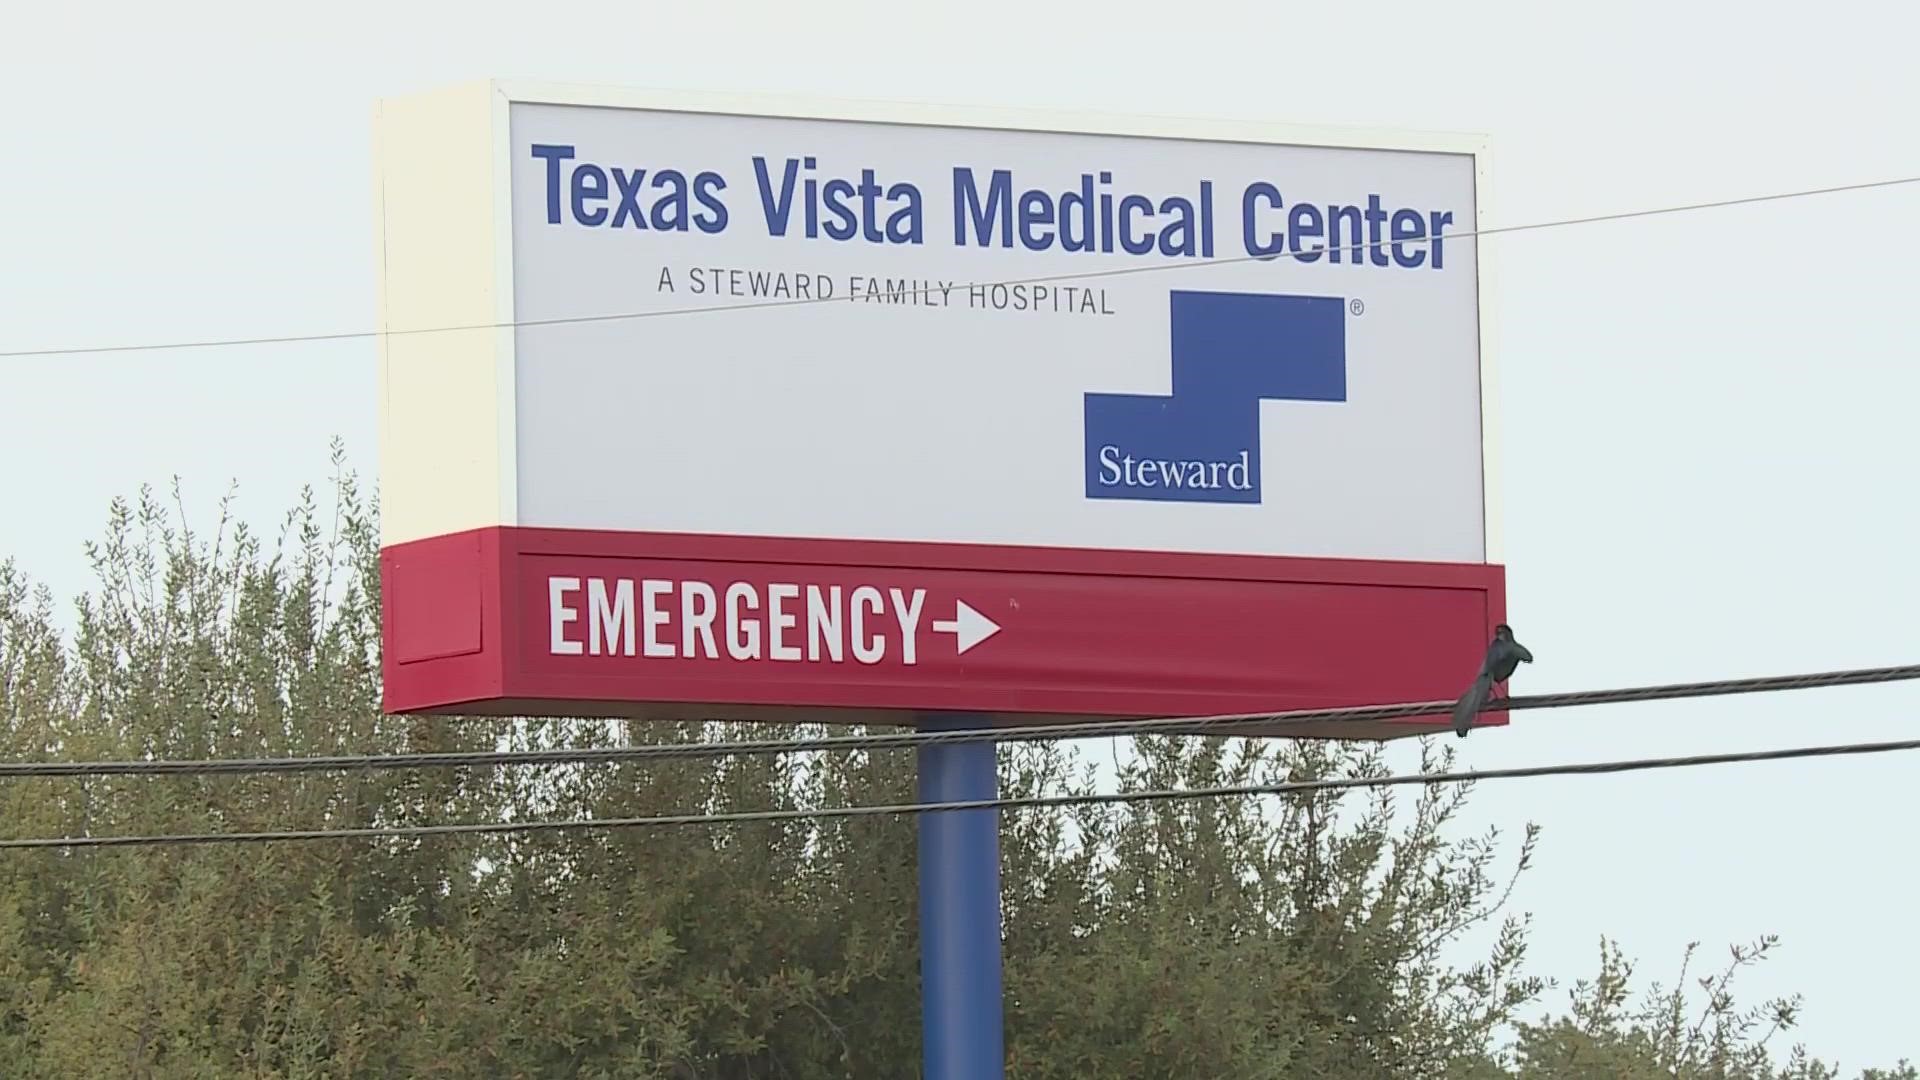 The closure was confirmed by Mayor Ron Nirenberg, who said that the hospital will close after almost 40 years.